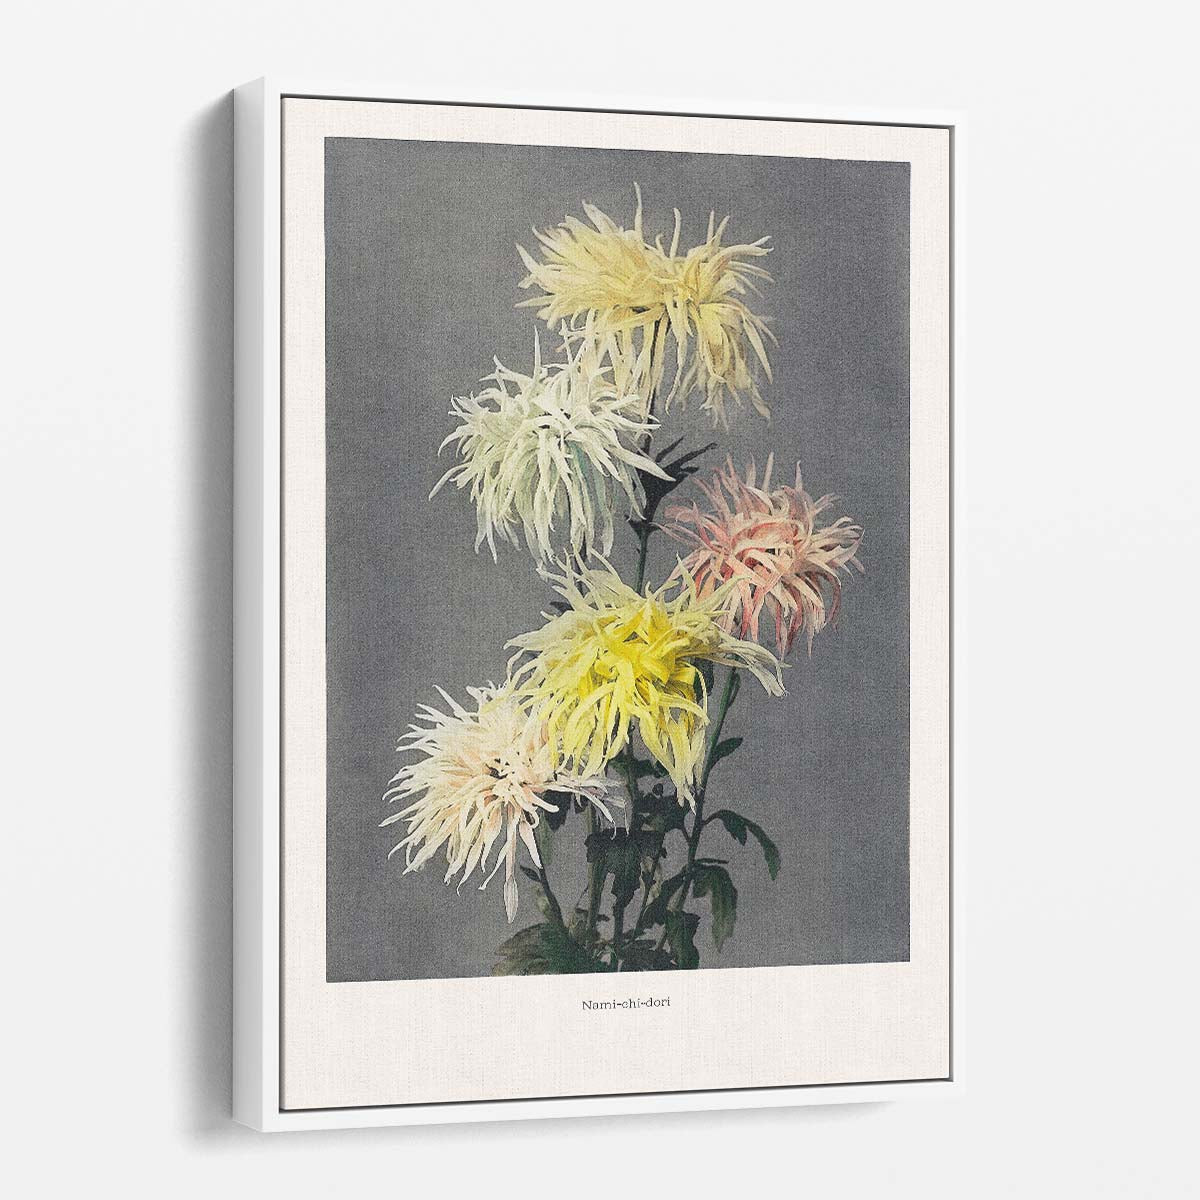 Ohara Koson Japanese Botanical Illustration Wall Art Poster by Luxuriance Designs, made in USA